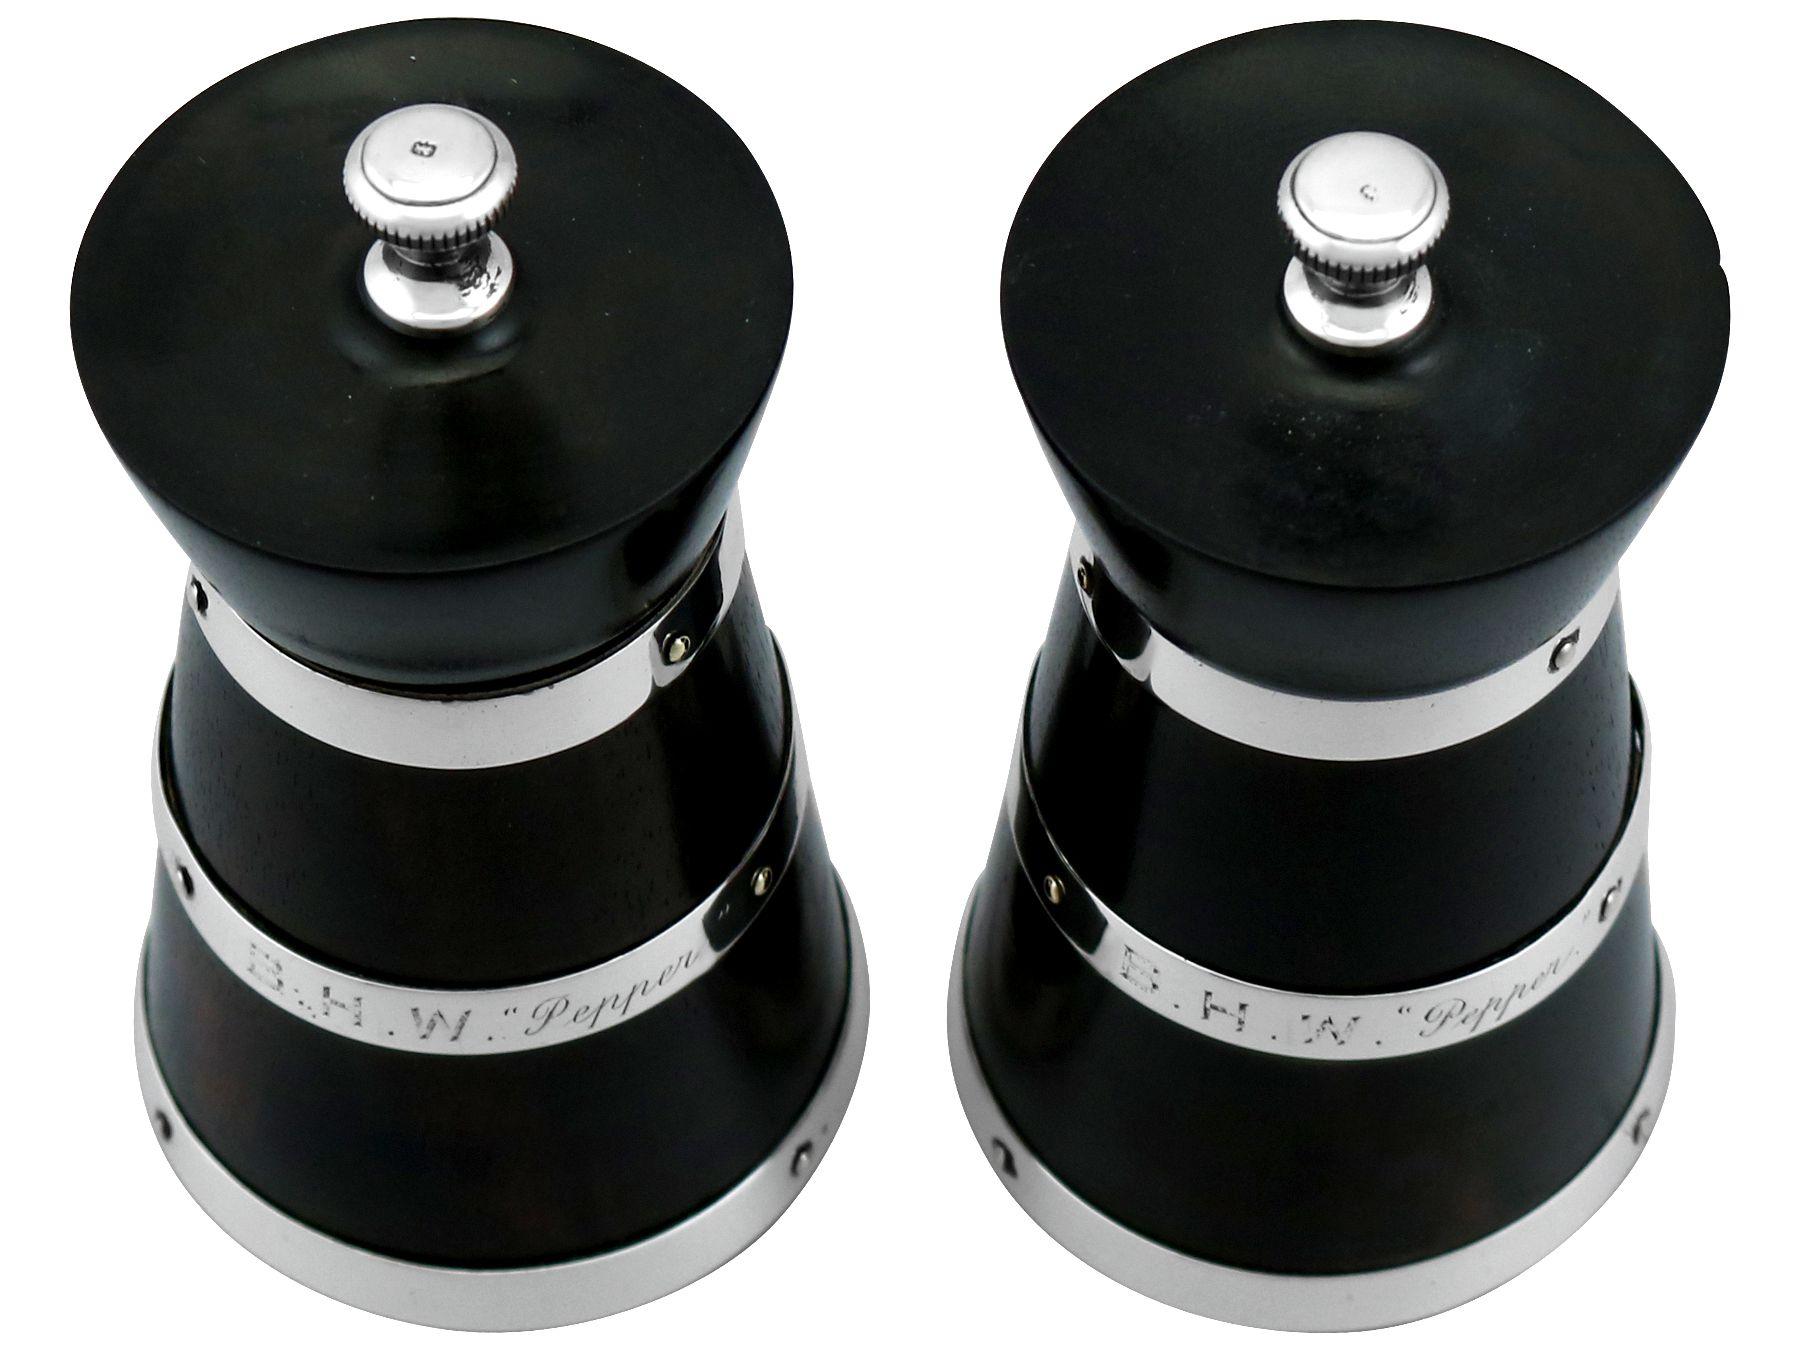 An exceptional, fine and impressive pair of antique George V English sterling silver and oak wood pepper grinders; an addition to our silver cruets/condiments collection

These exceptional antique Victorian English wood and sterling silver pepper